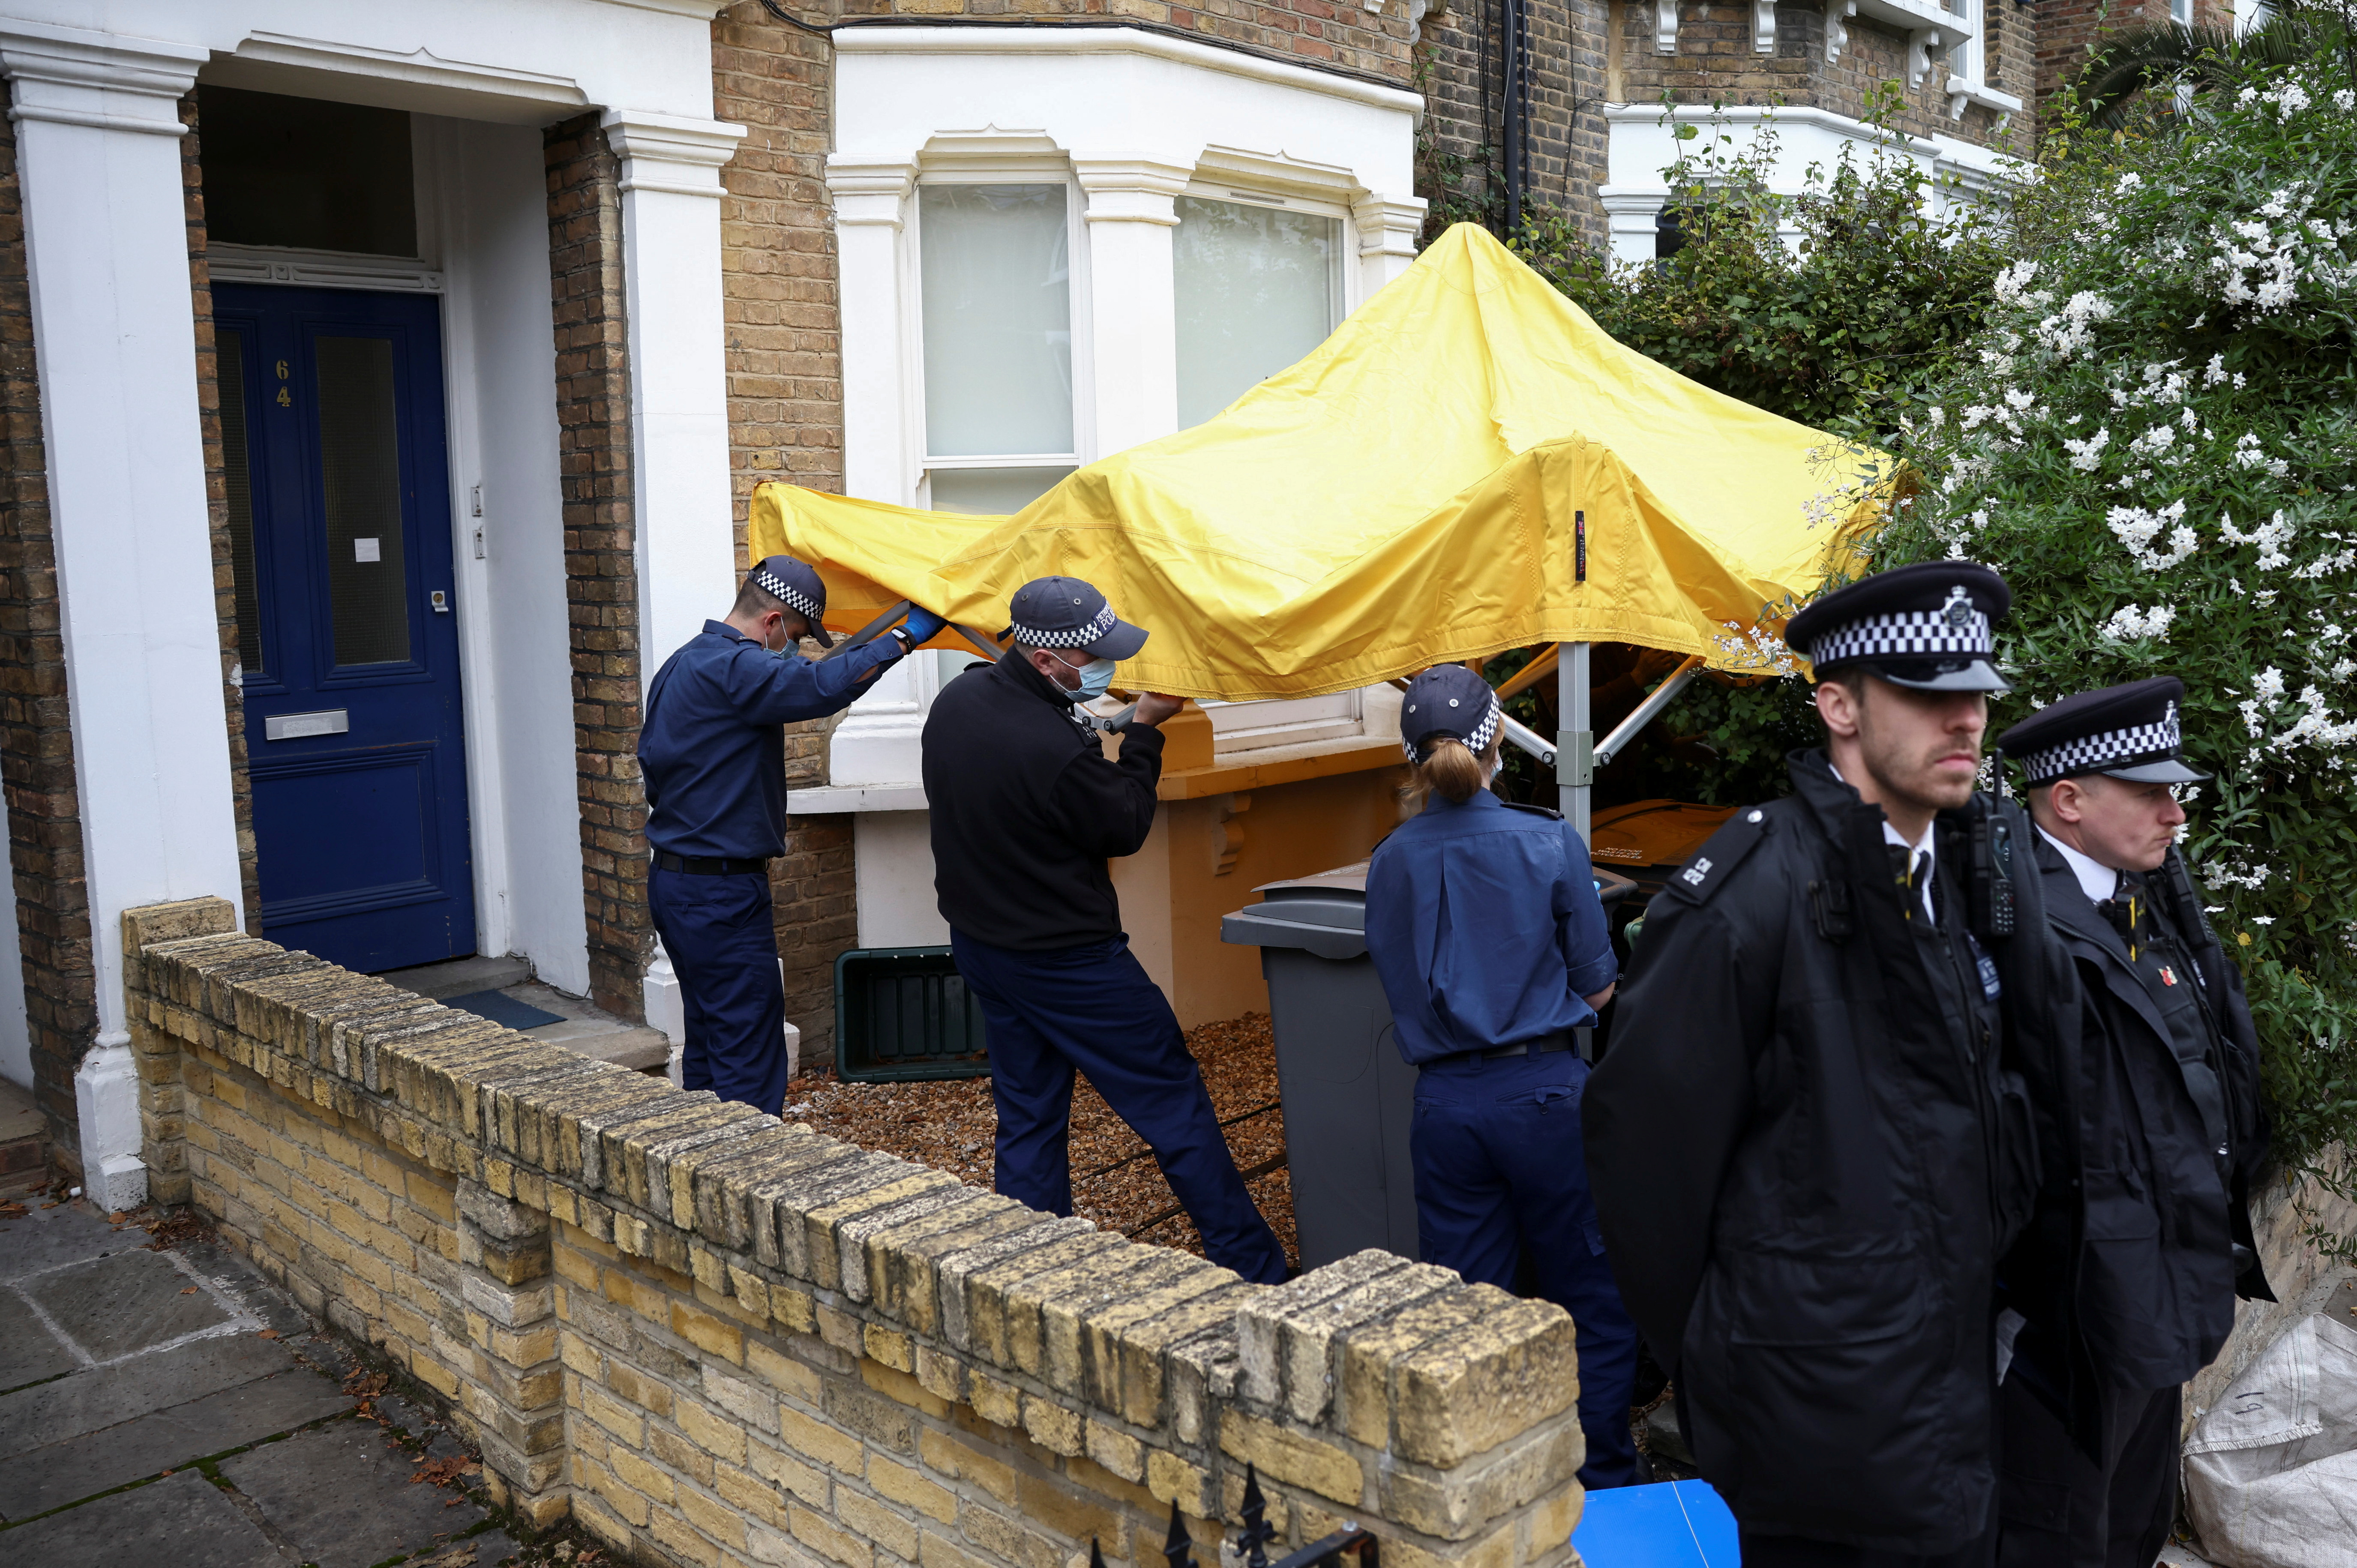 Police work at house believed to be address belonging to man arrested in connection with killing of British MP Amess, in London